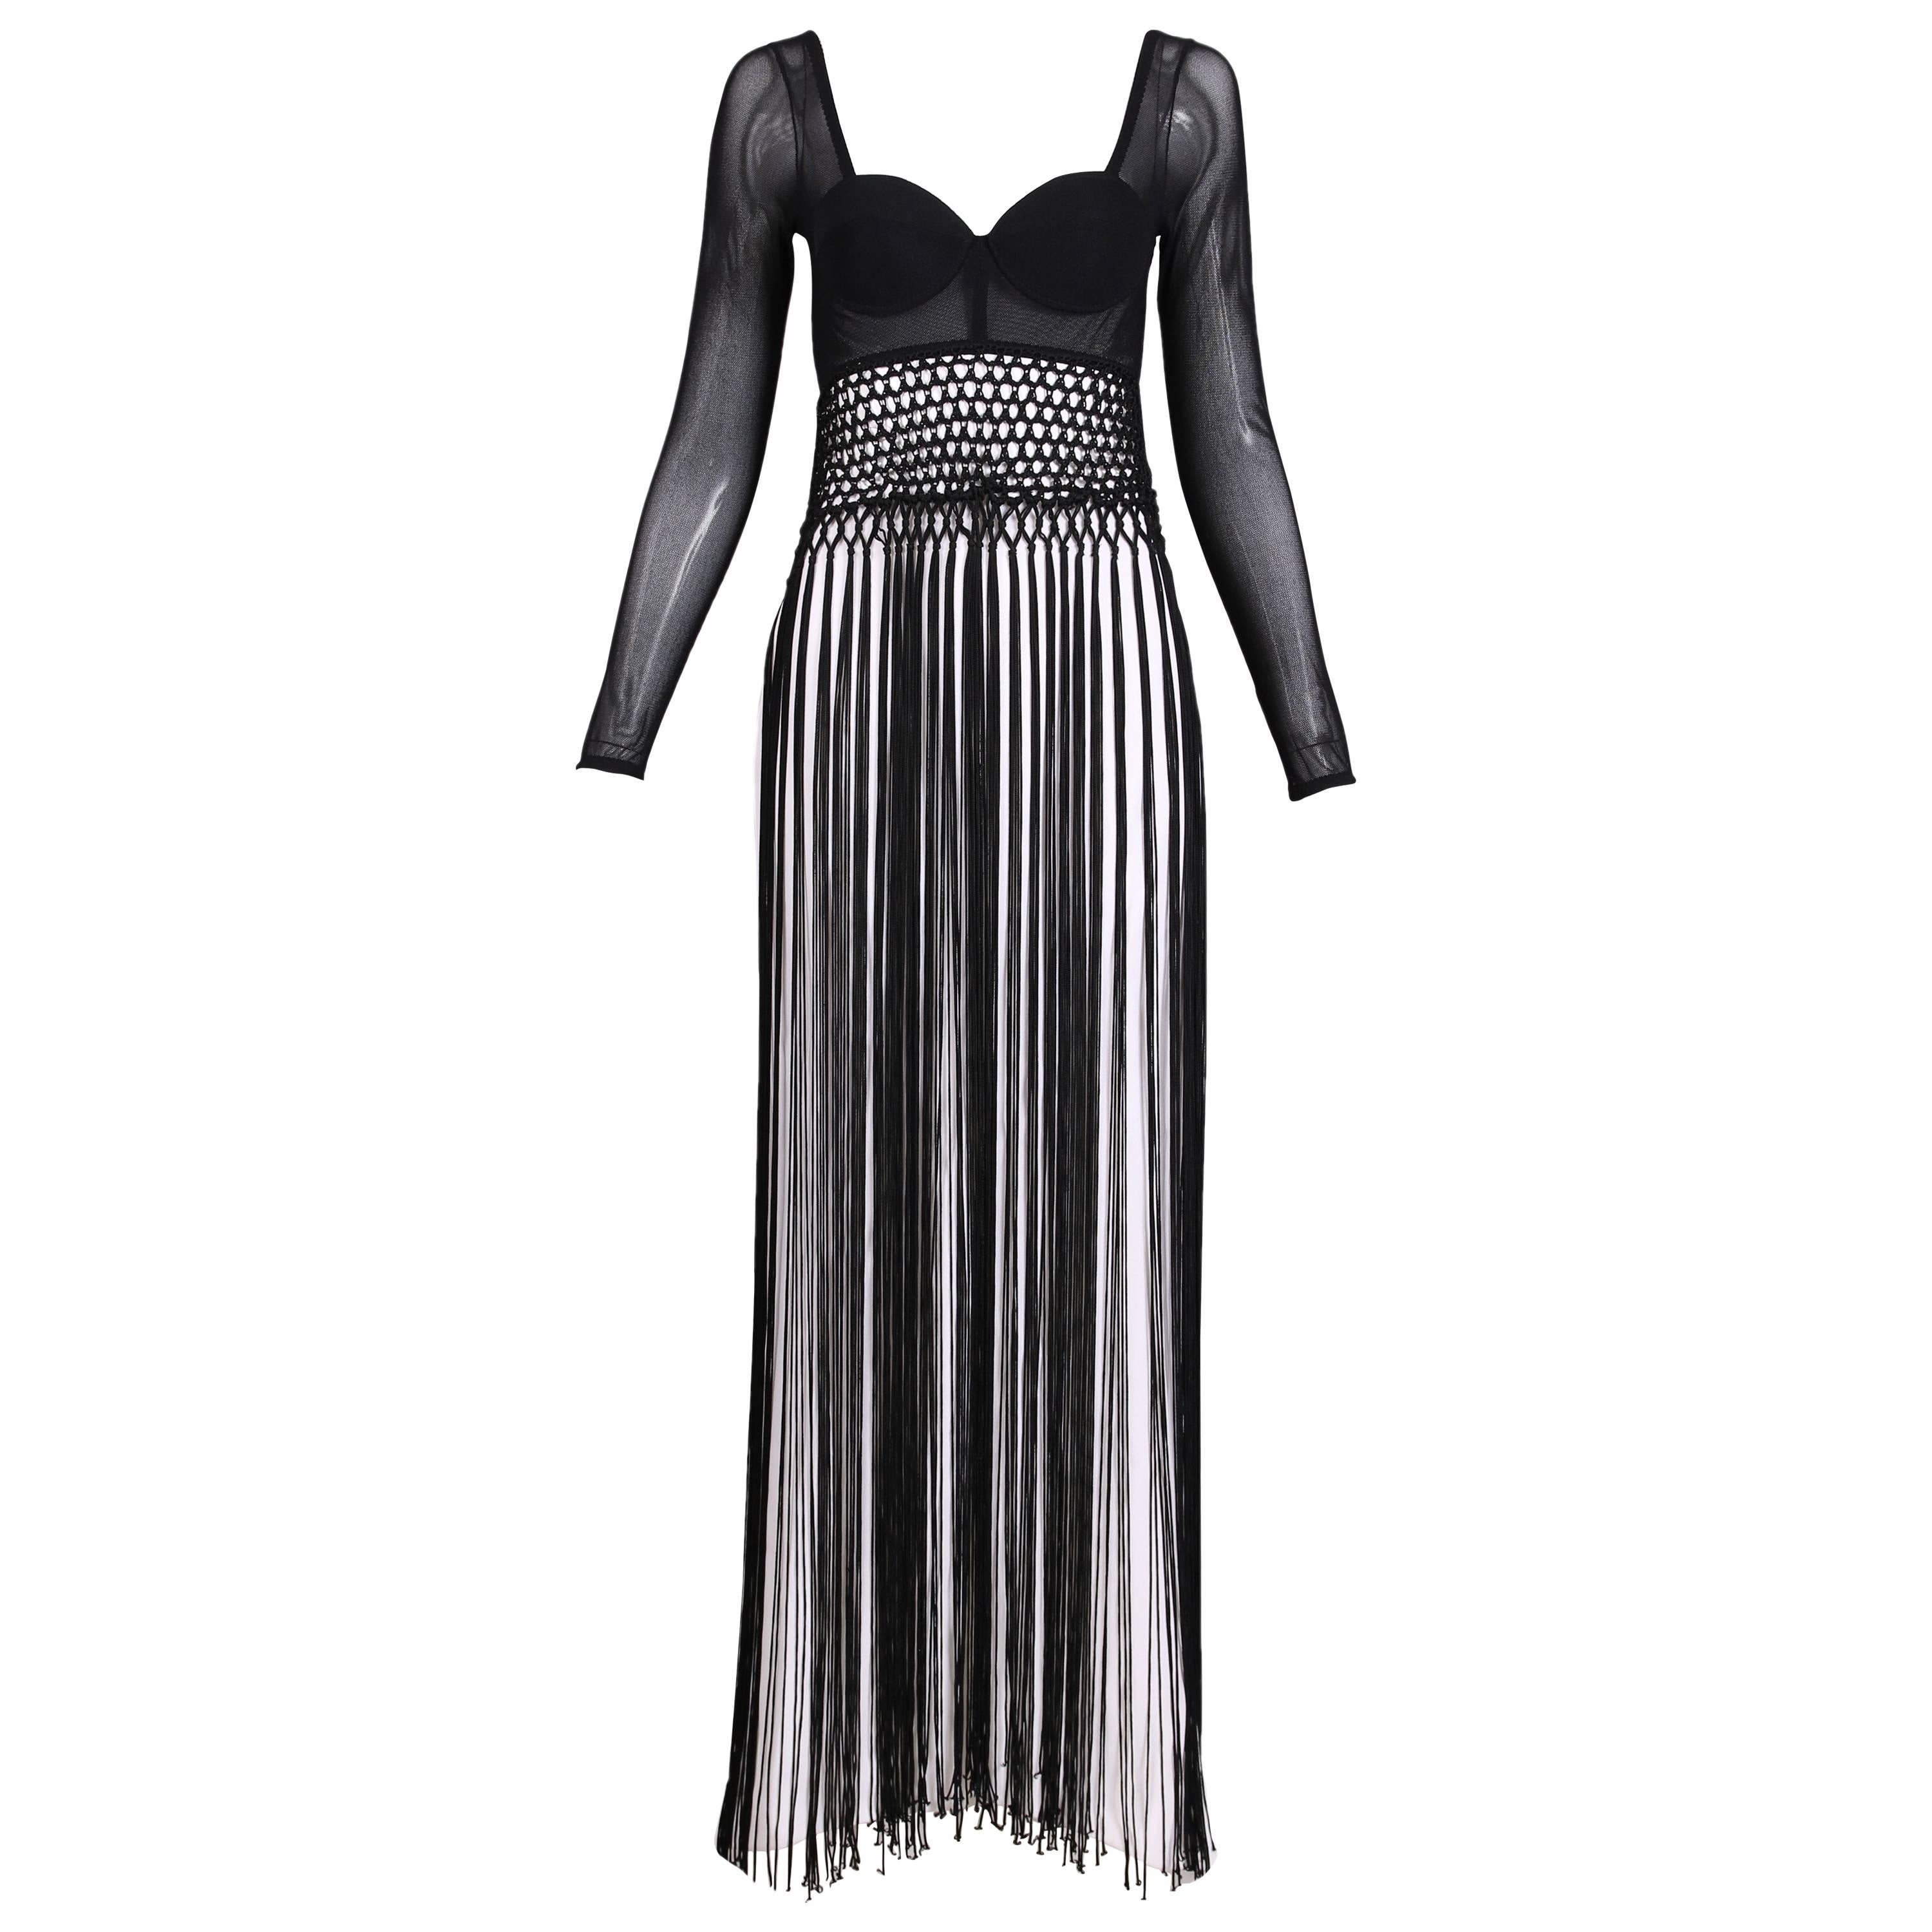 Christian Dior Black & White Illusion Top Gown W/Long Fringe Detail Ca. 1989/96